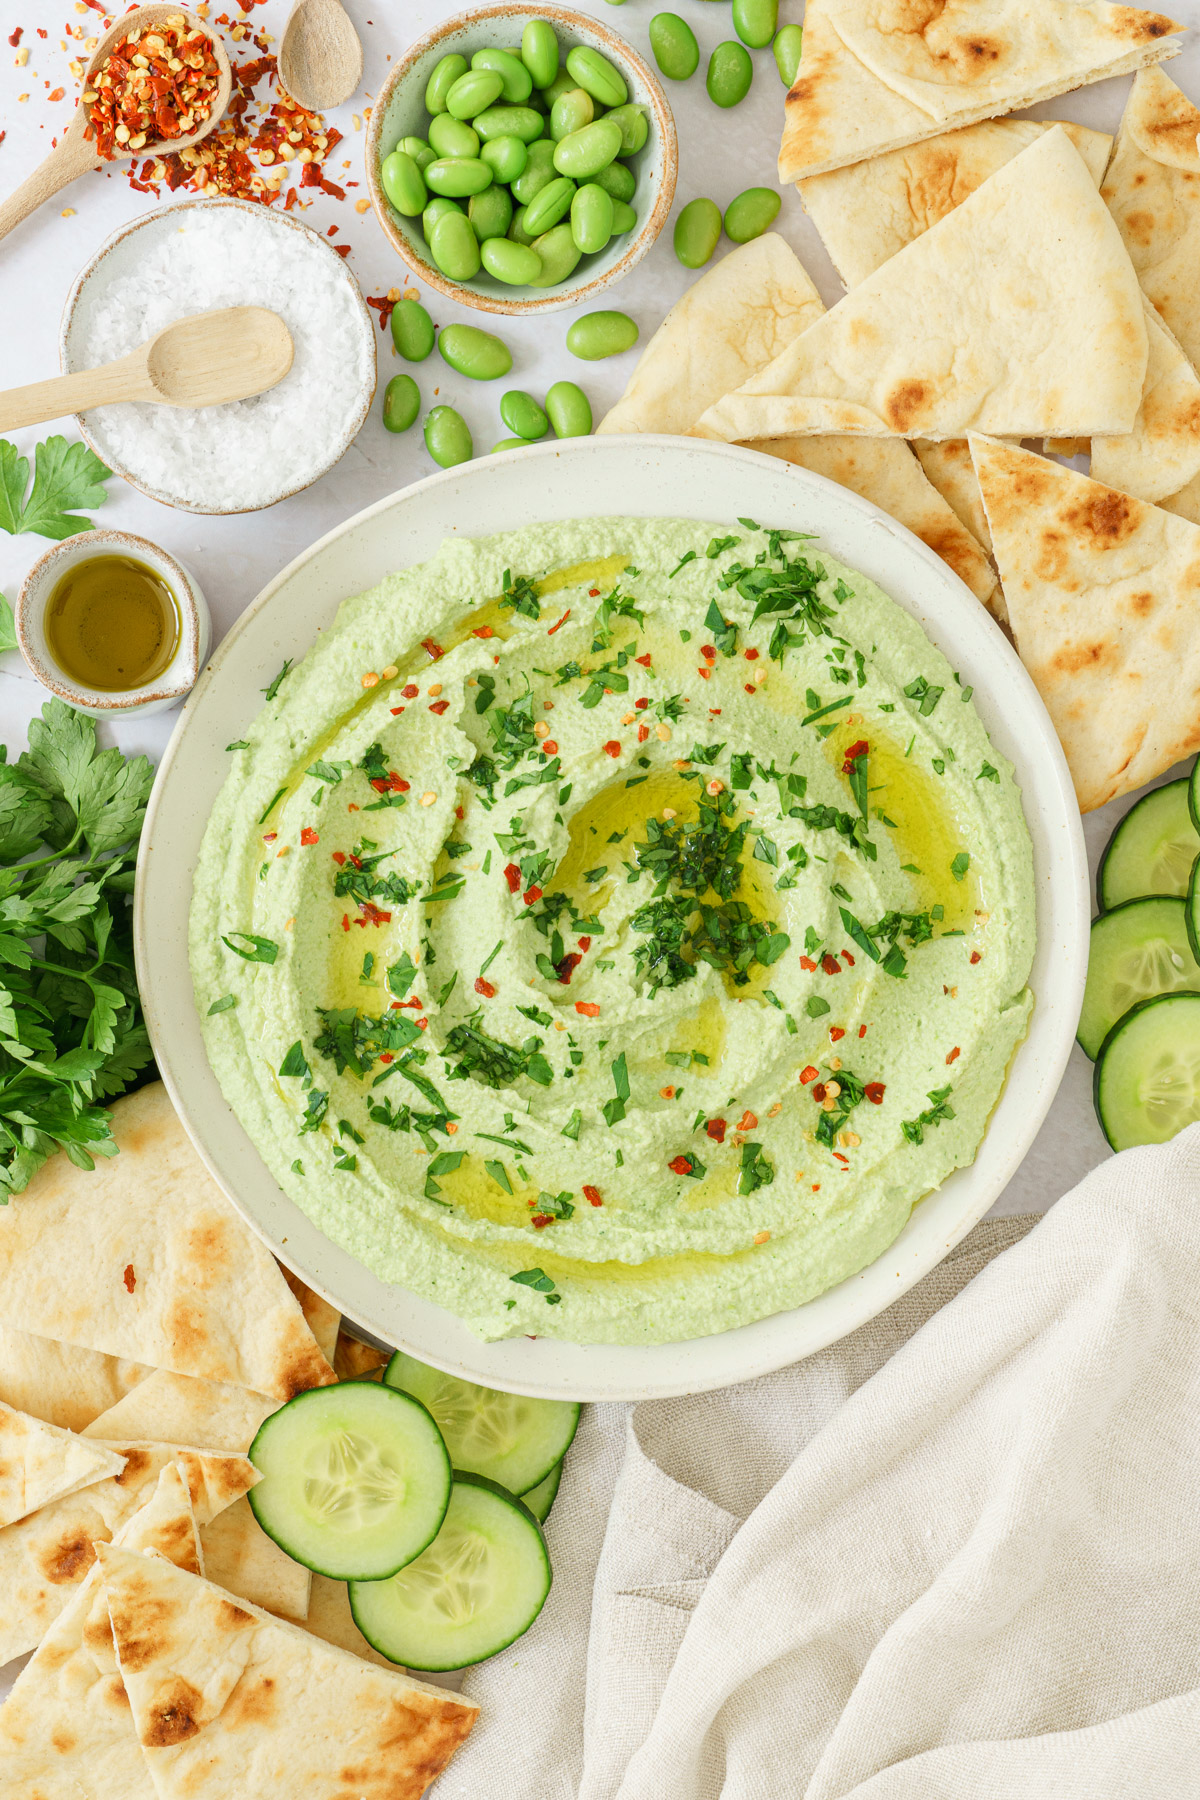 top view image of an edamame hummus in a bowl